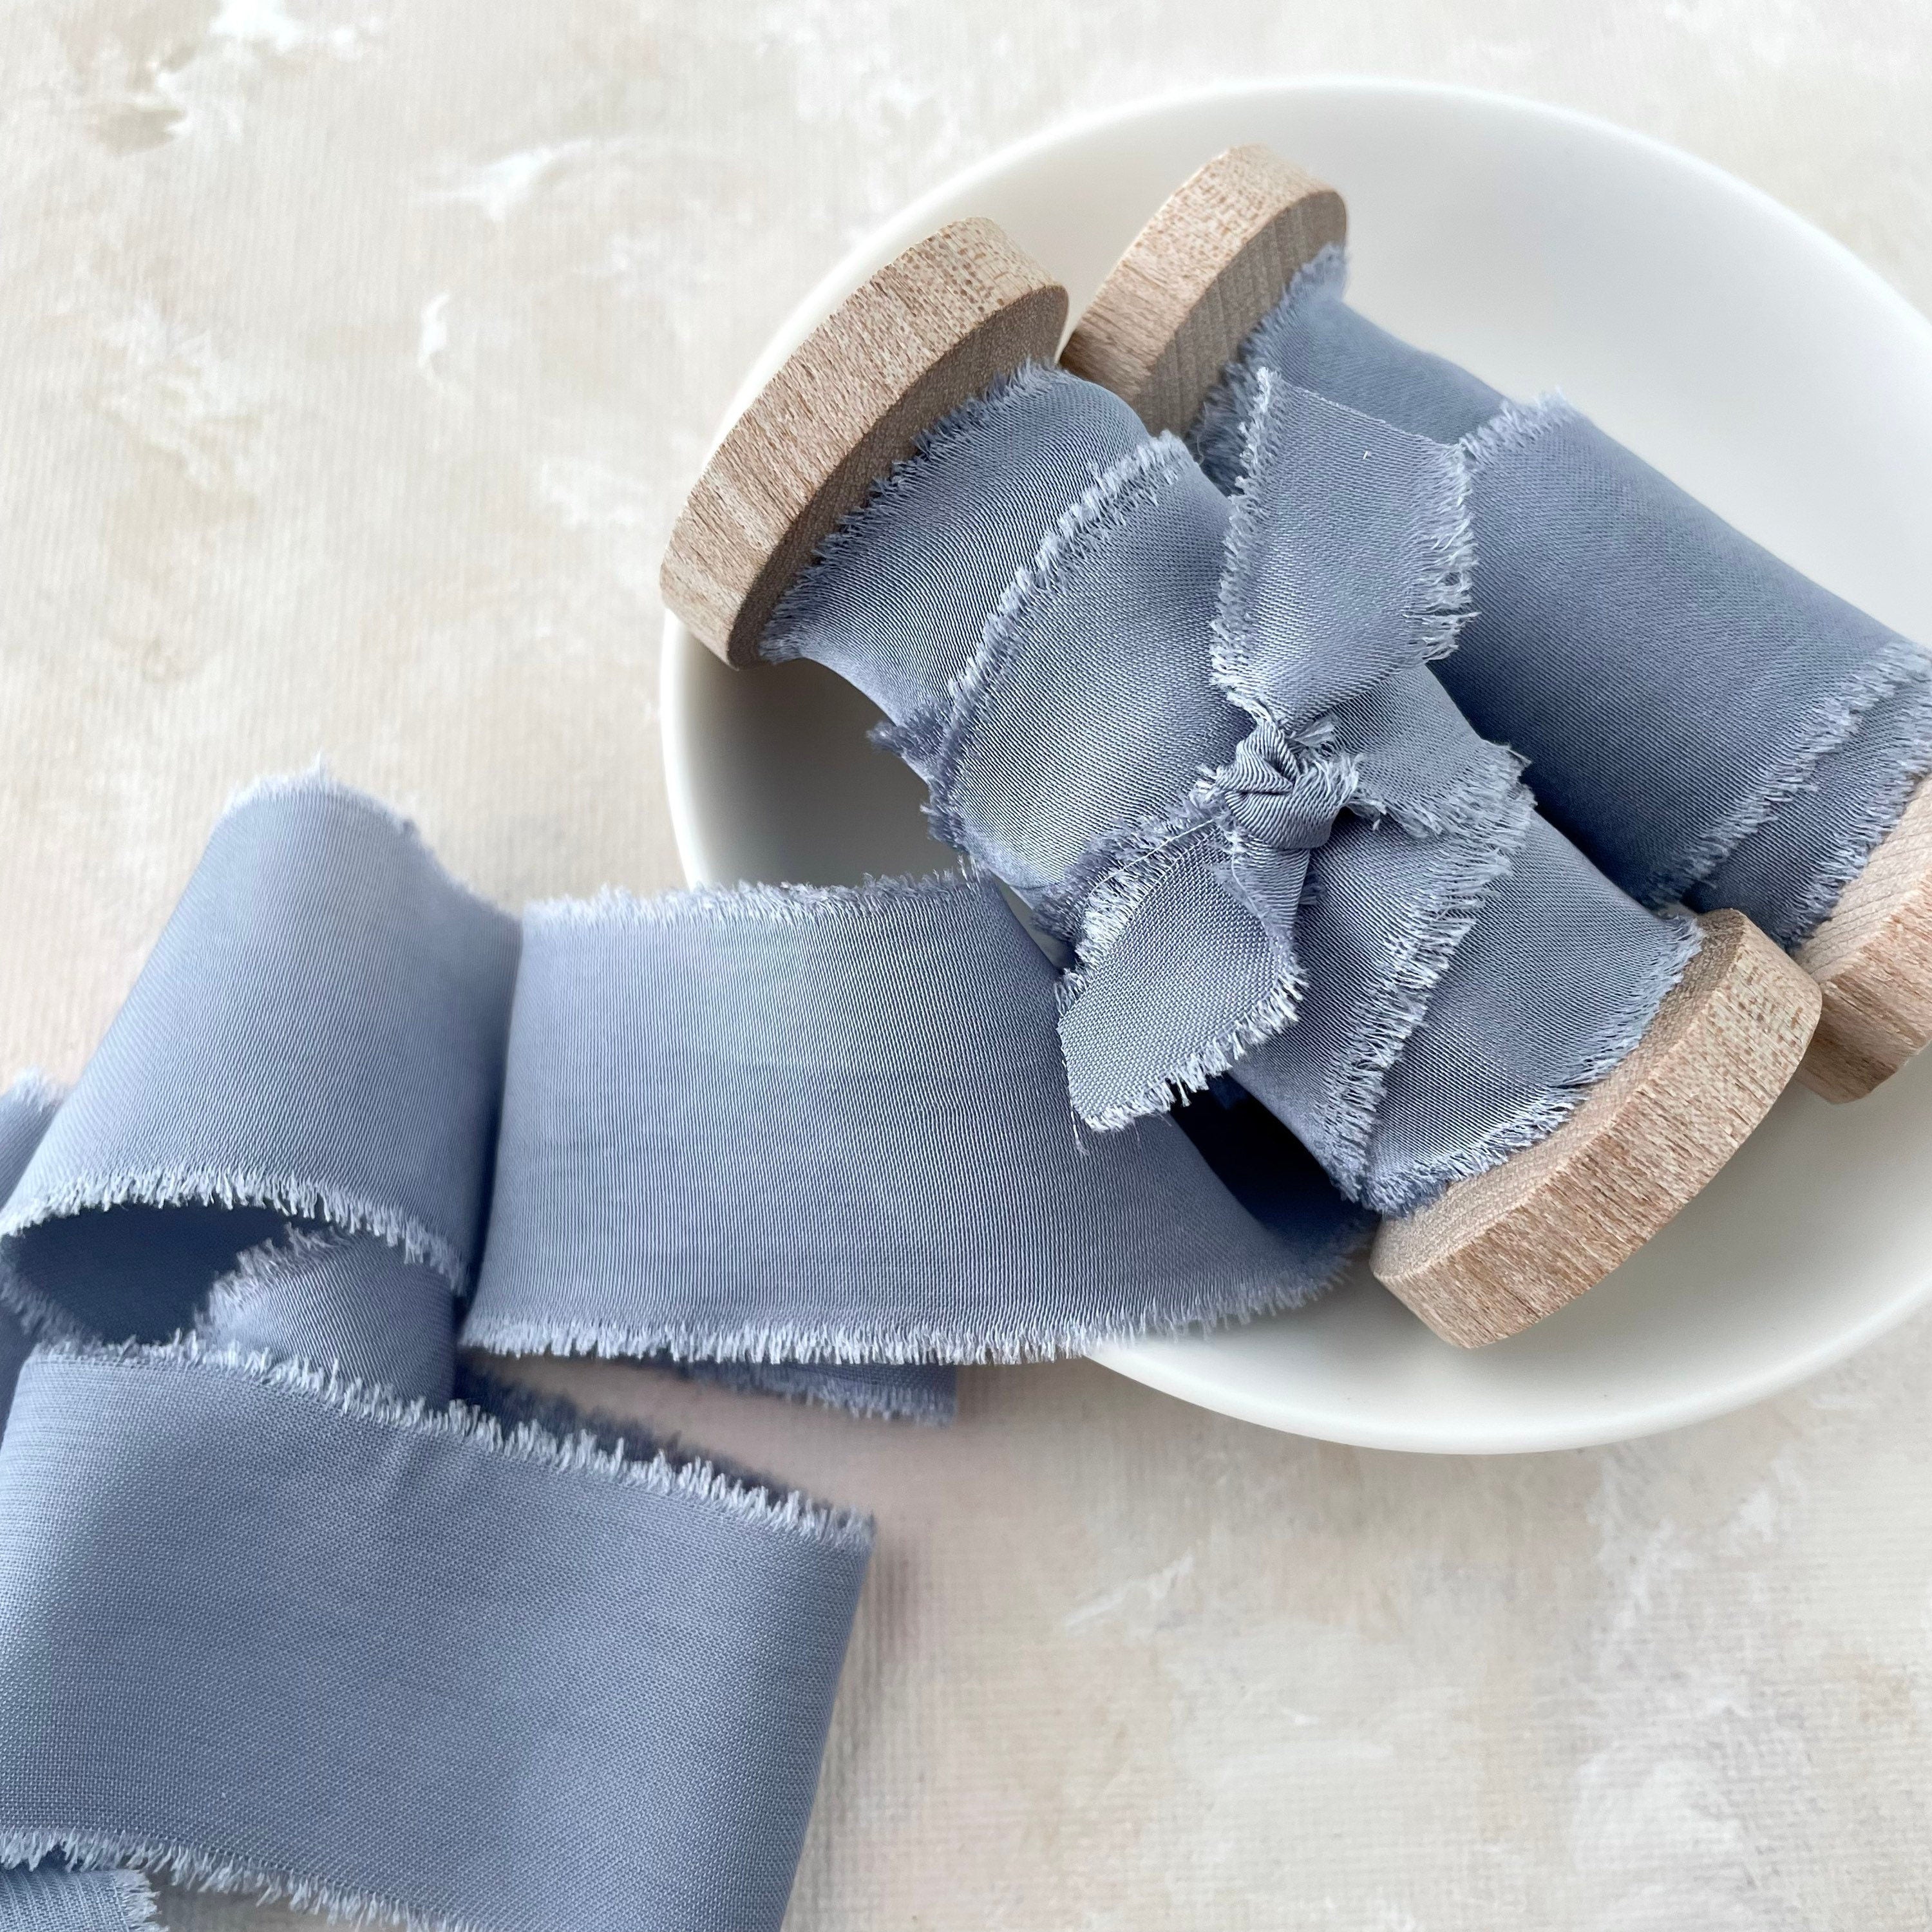 Dusty Blue Ribbon, styling ribbon flat lay props from Champagne & GRIT